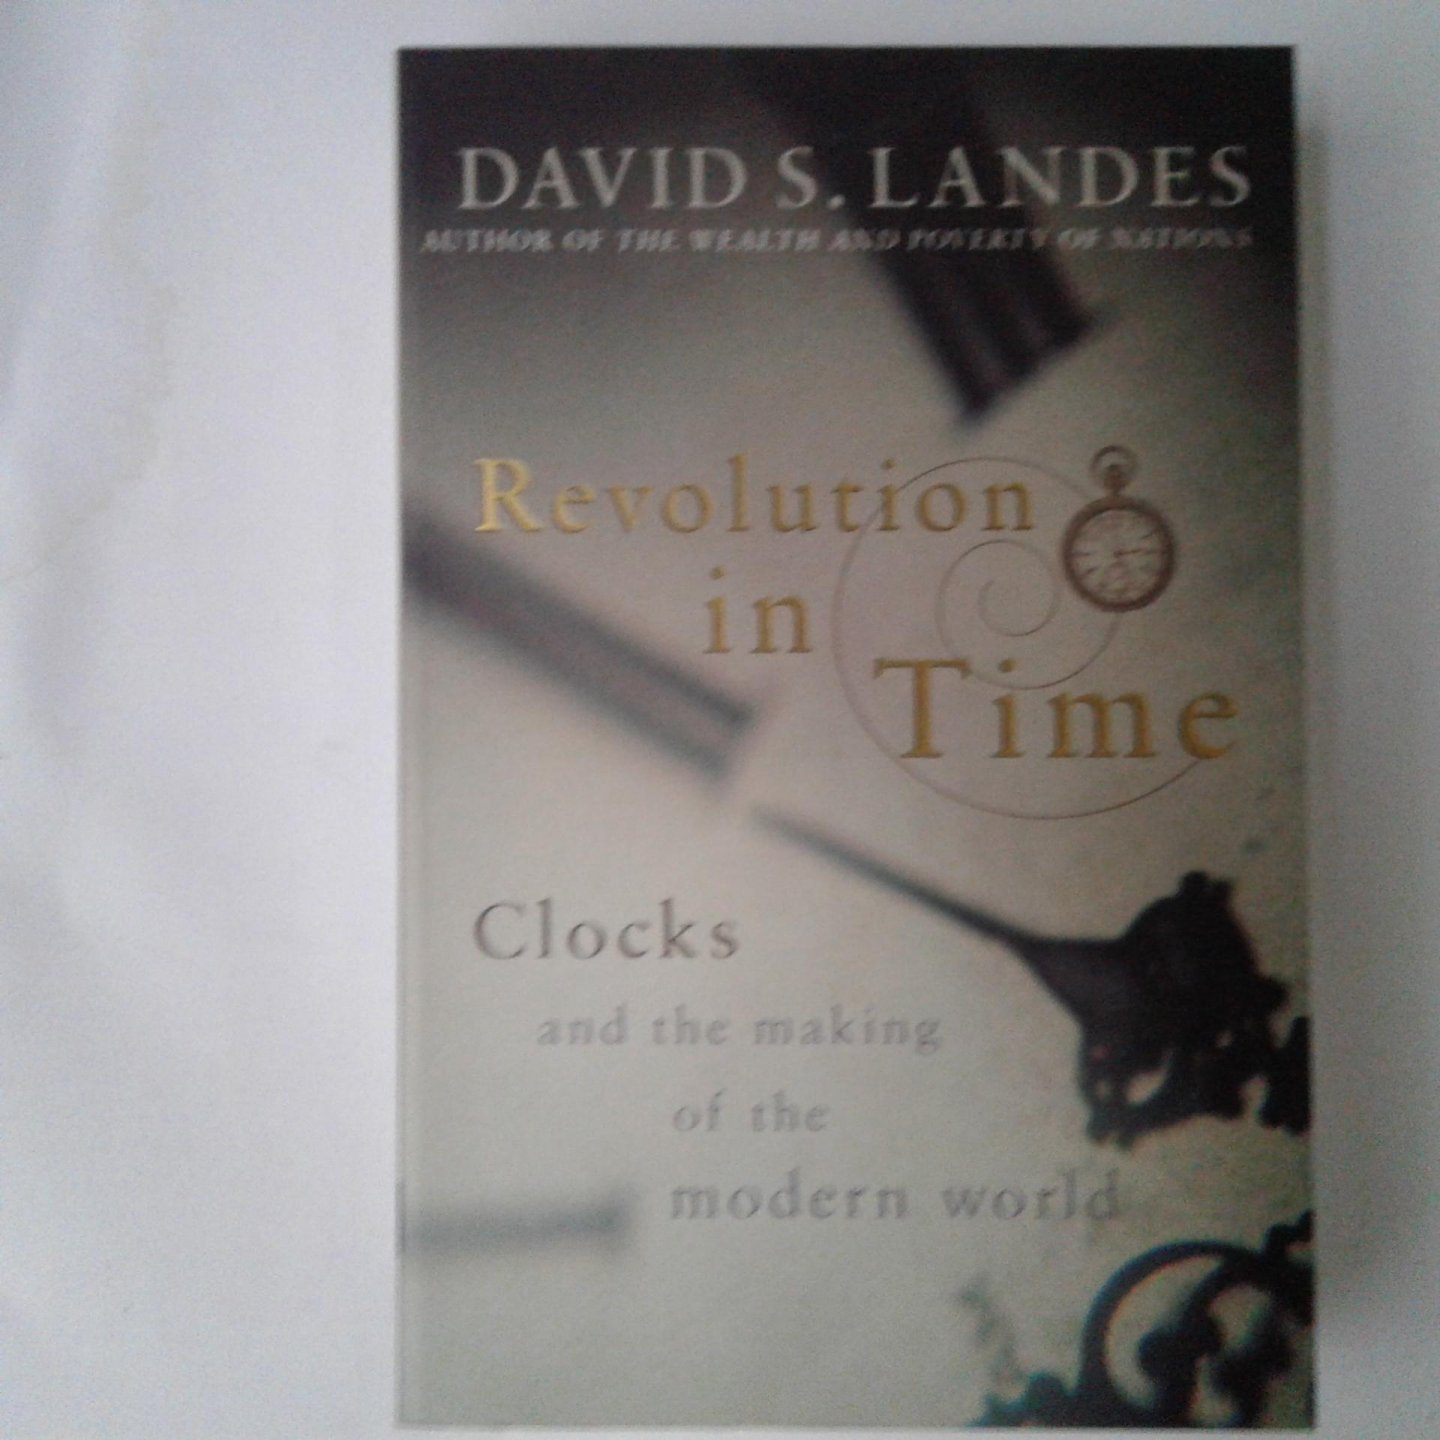 Landes, David S. - Revolution in Time ; Clocks and the Making of the Modern World